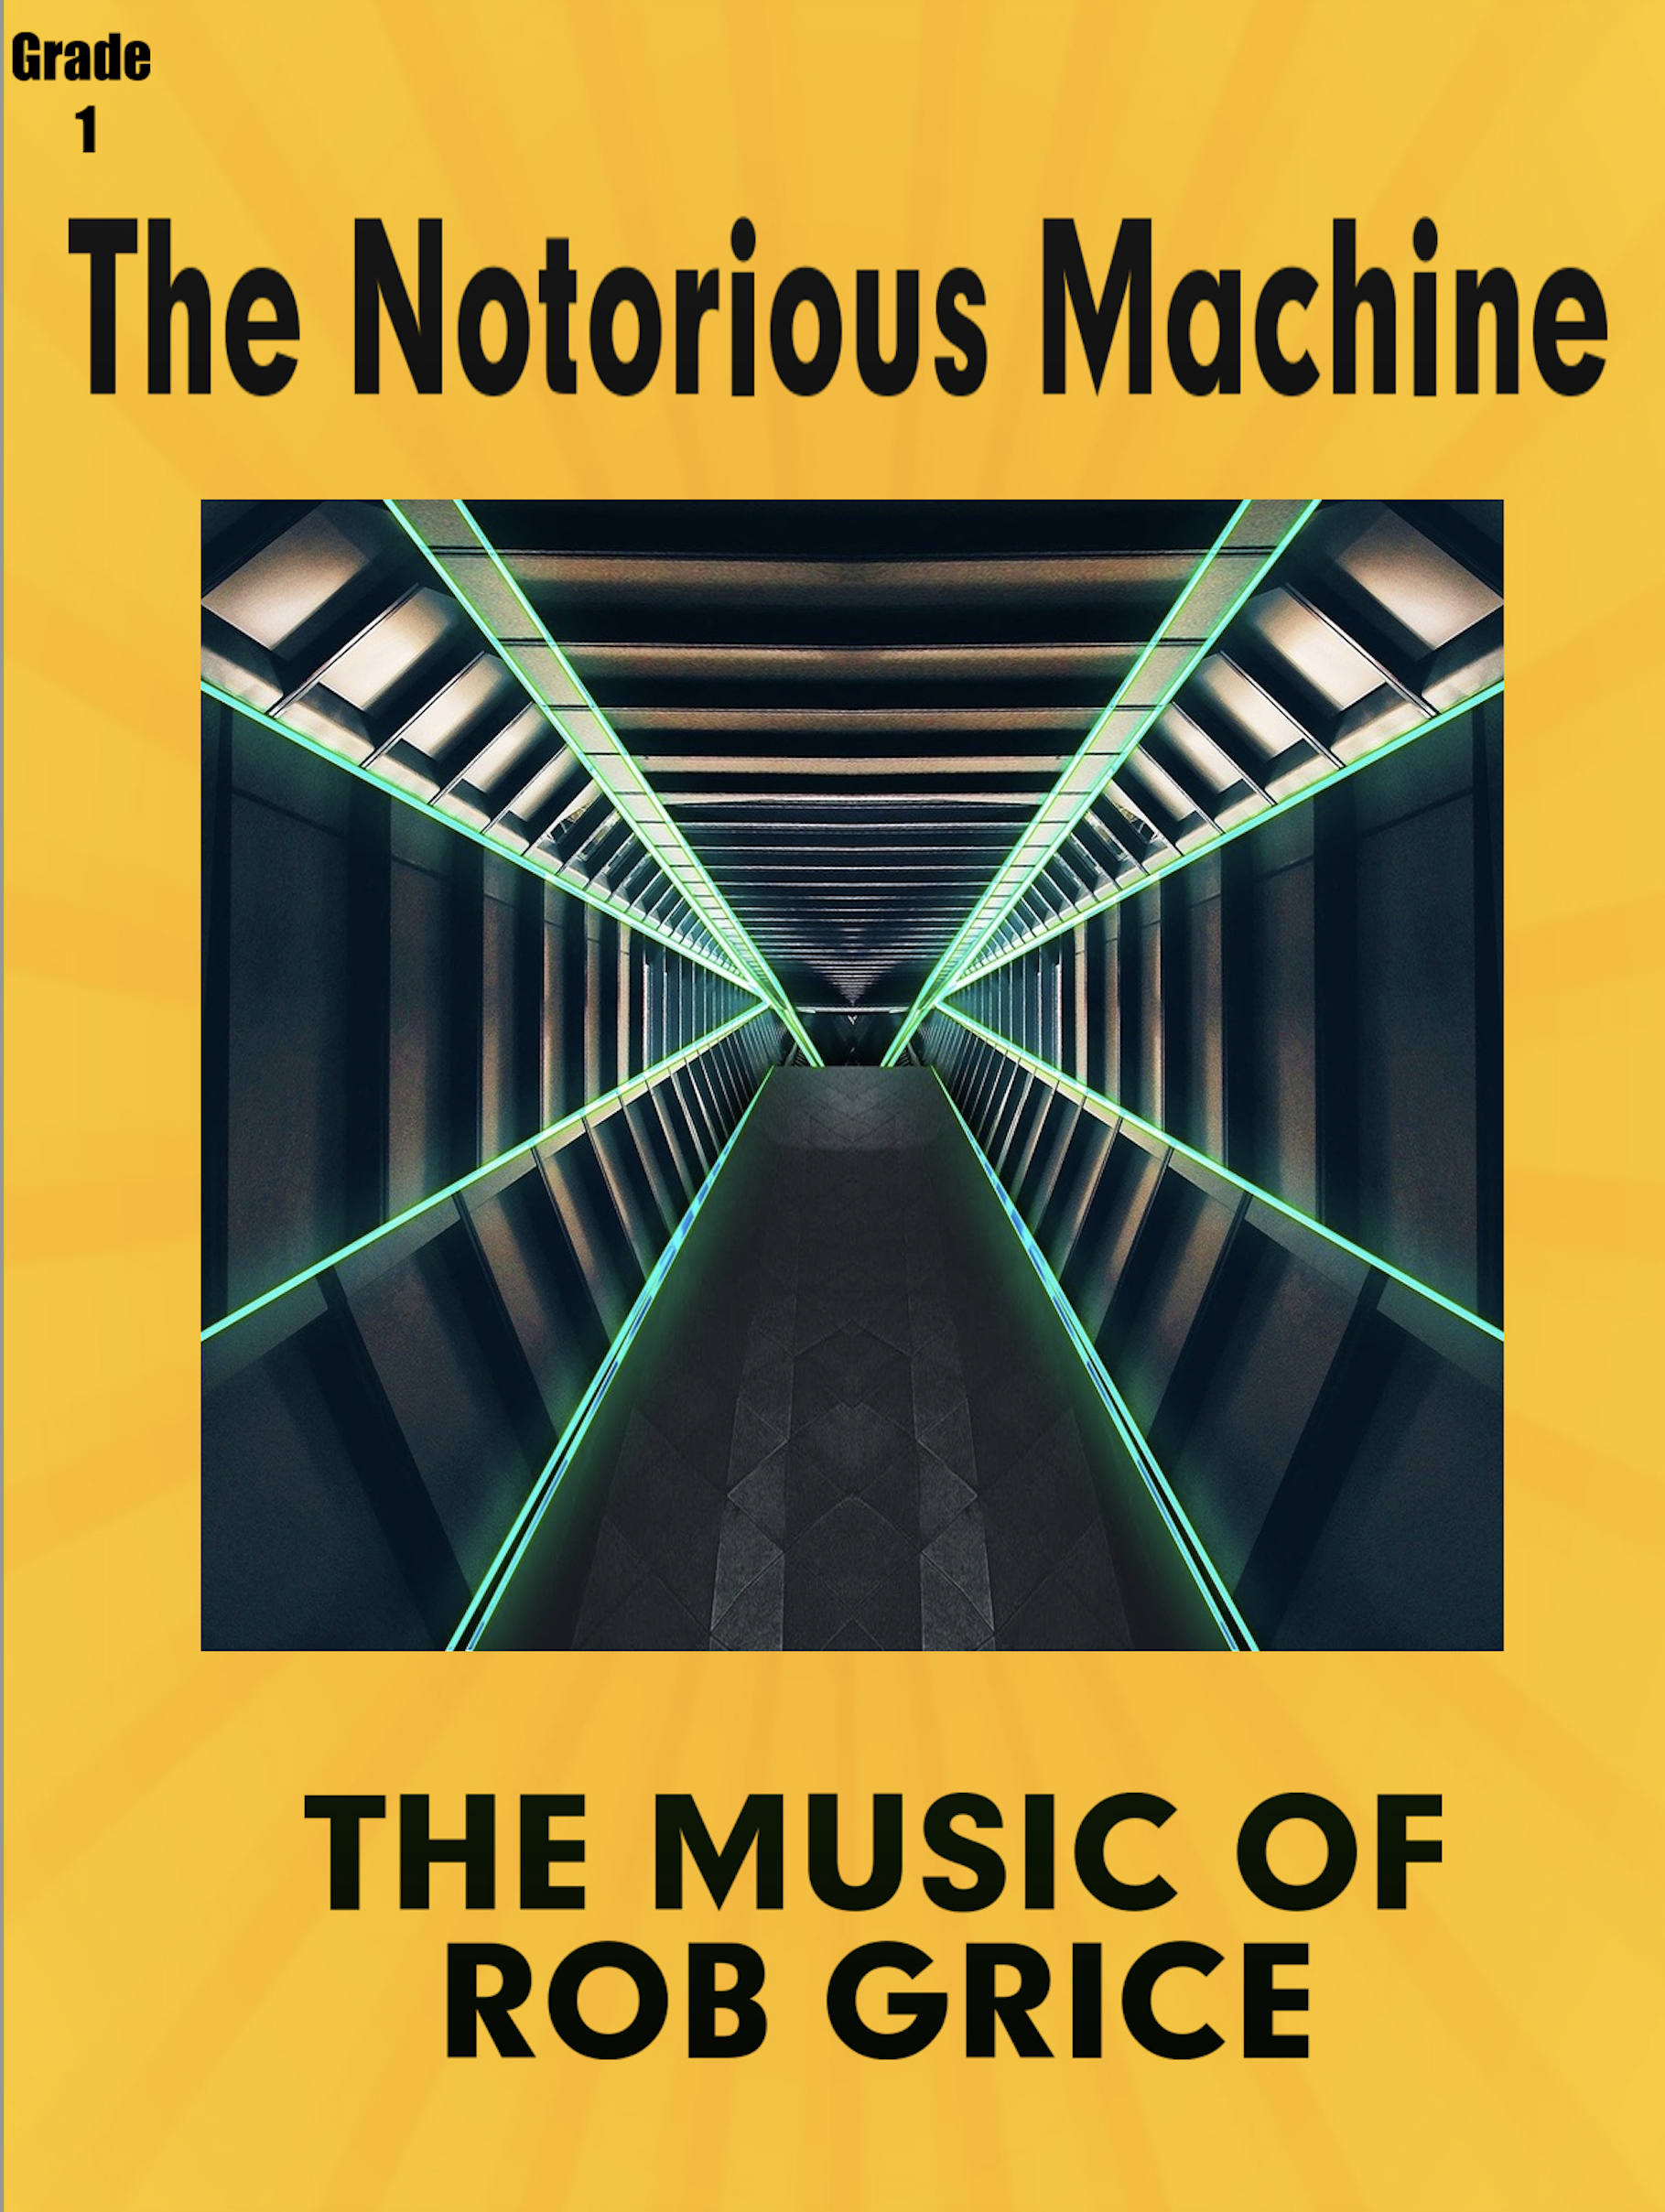 The Notorious Machine by Rob Grice